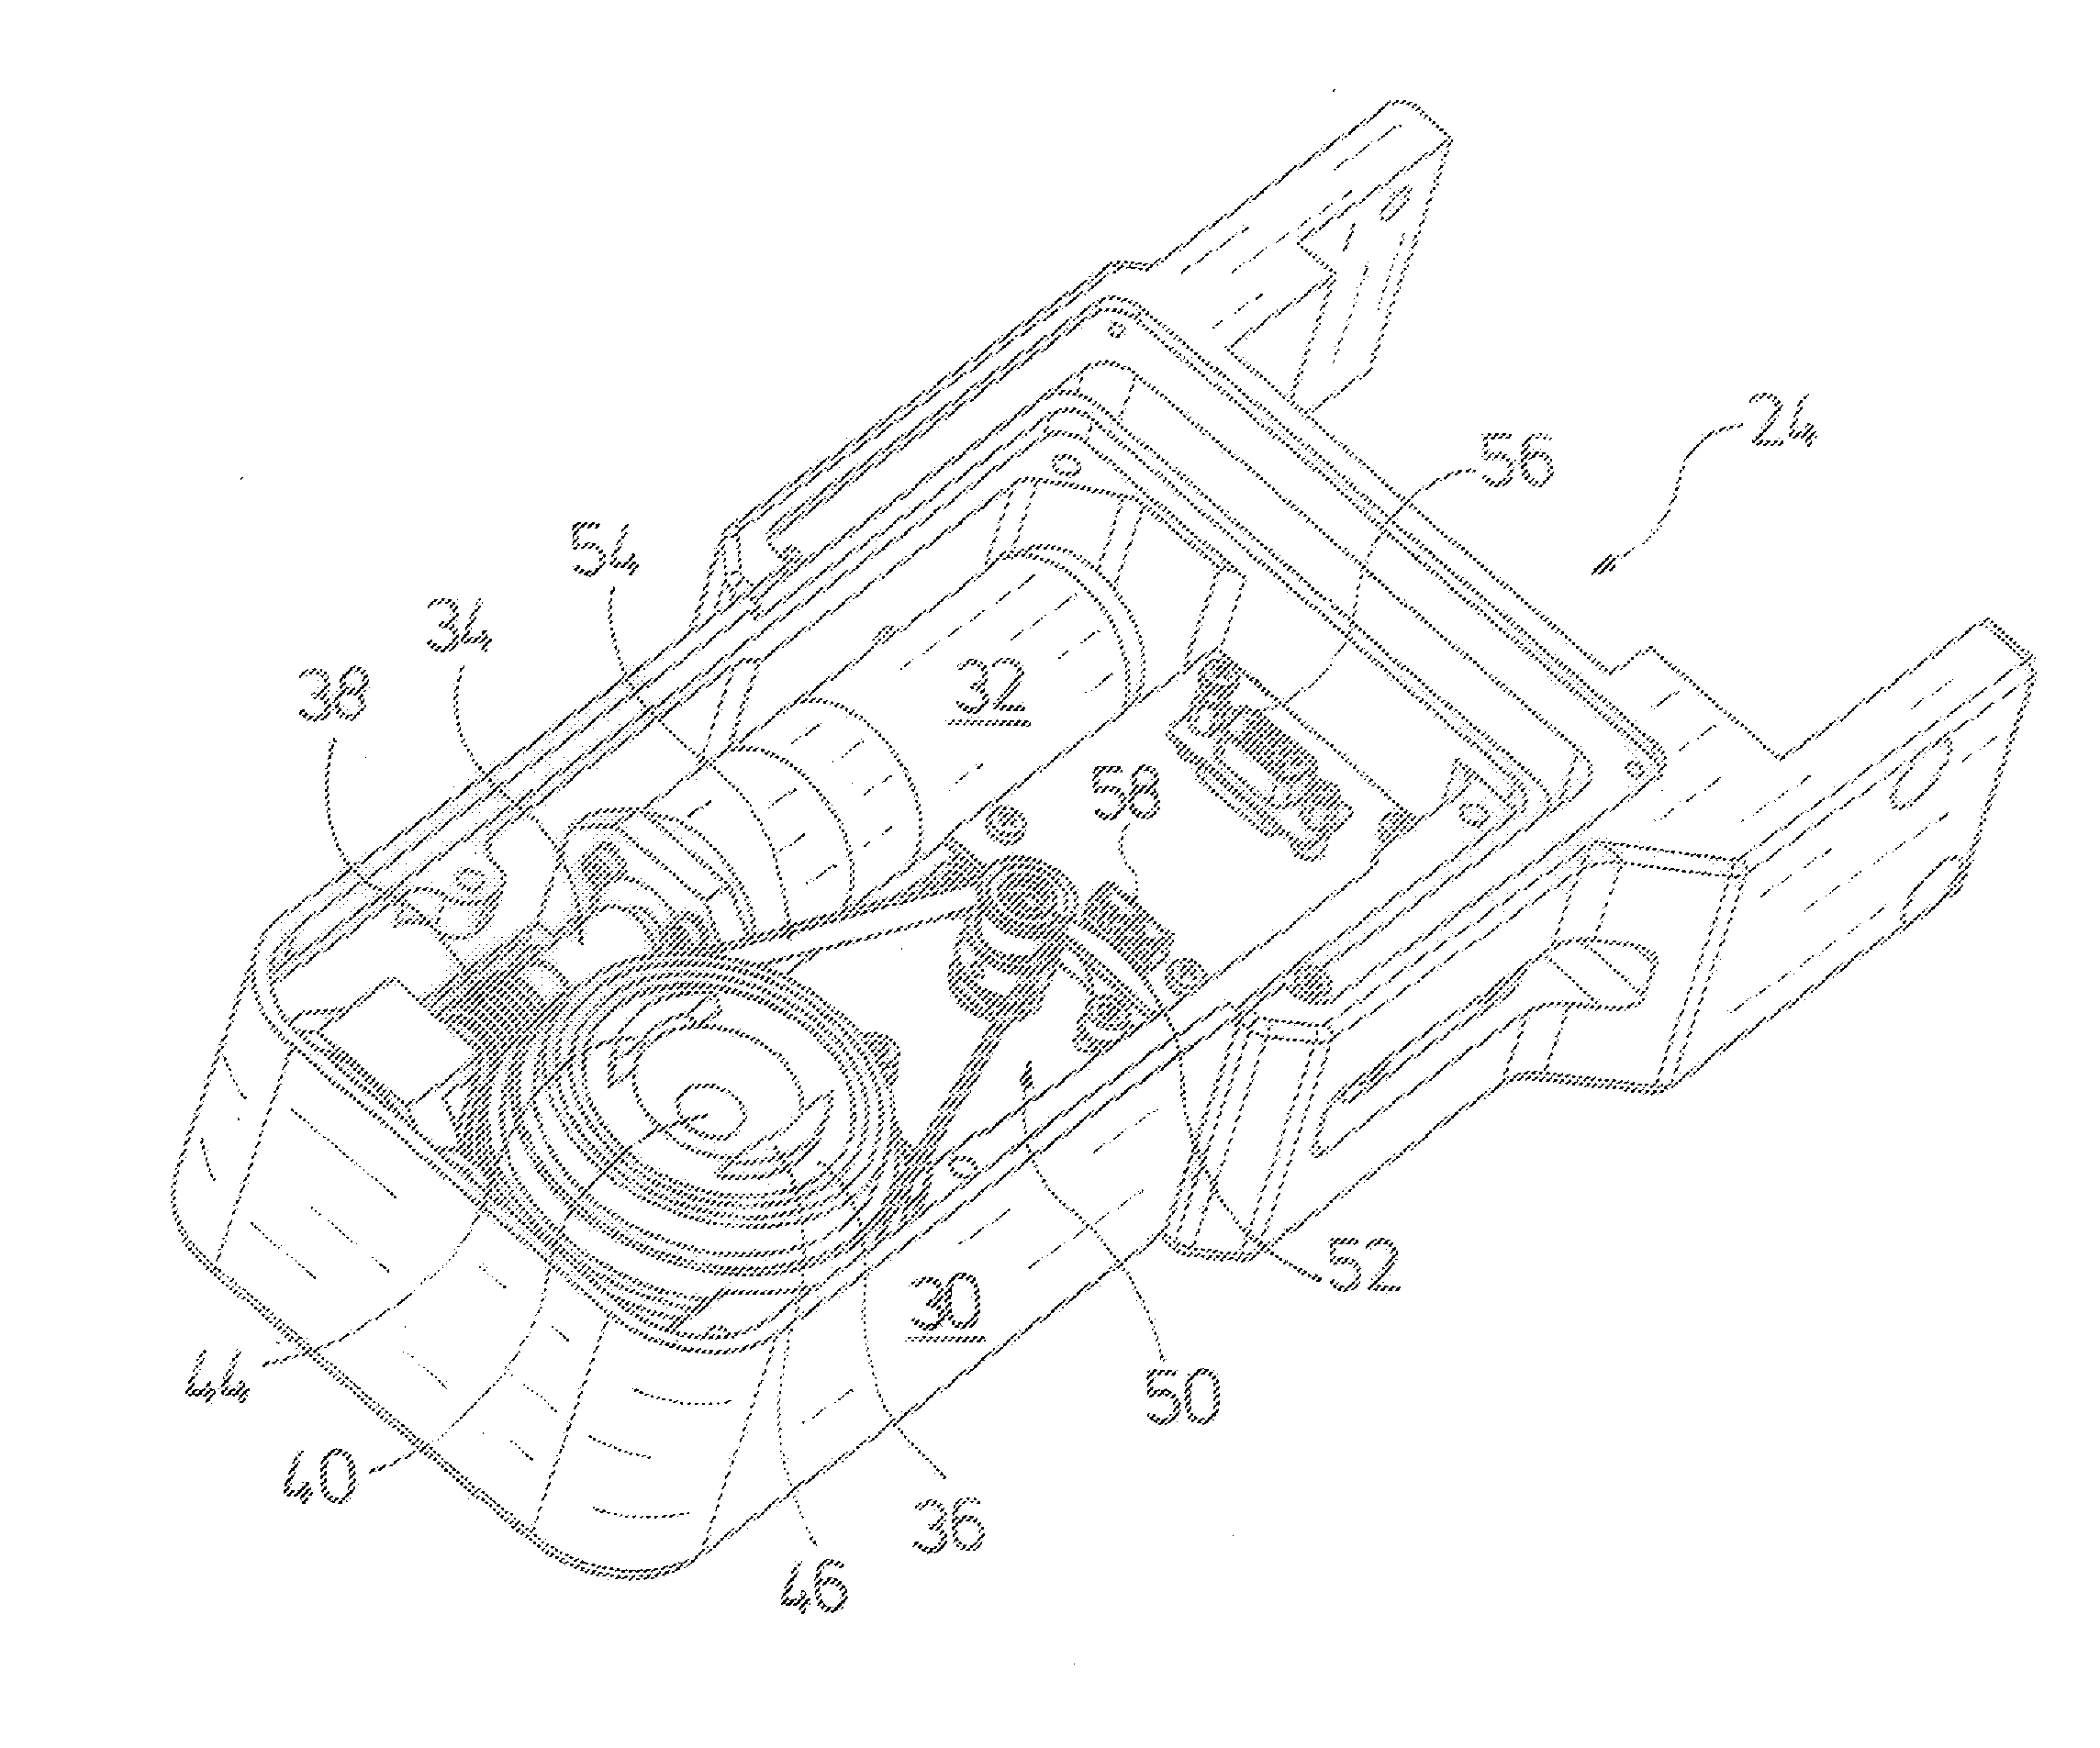 Swiveling device for a swiveling c-arm of an x-ray unit